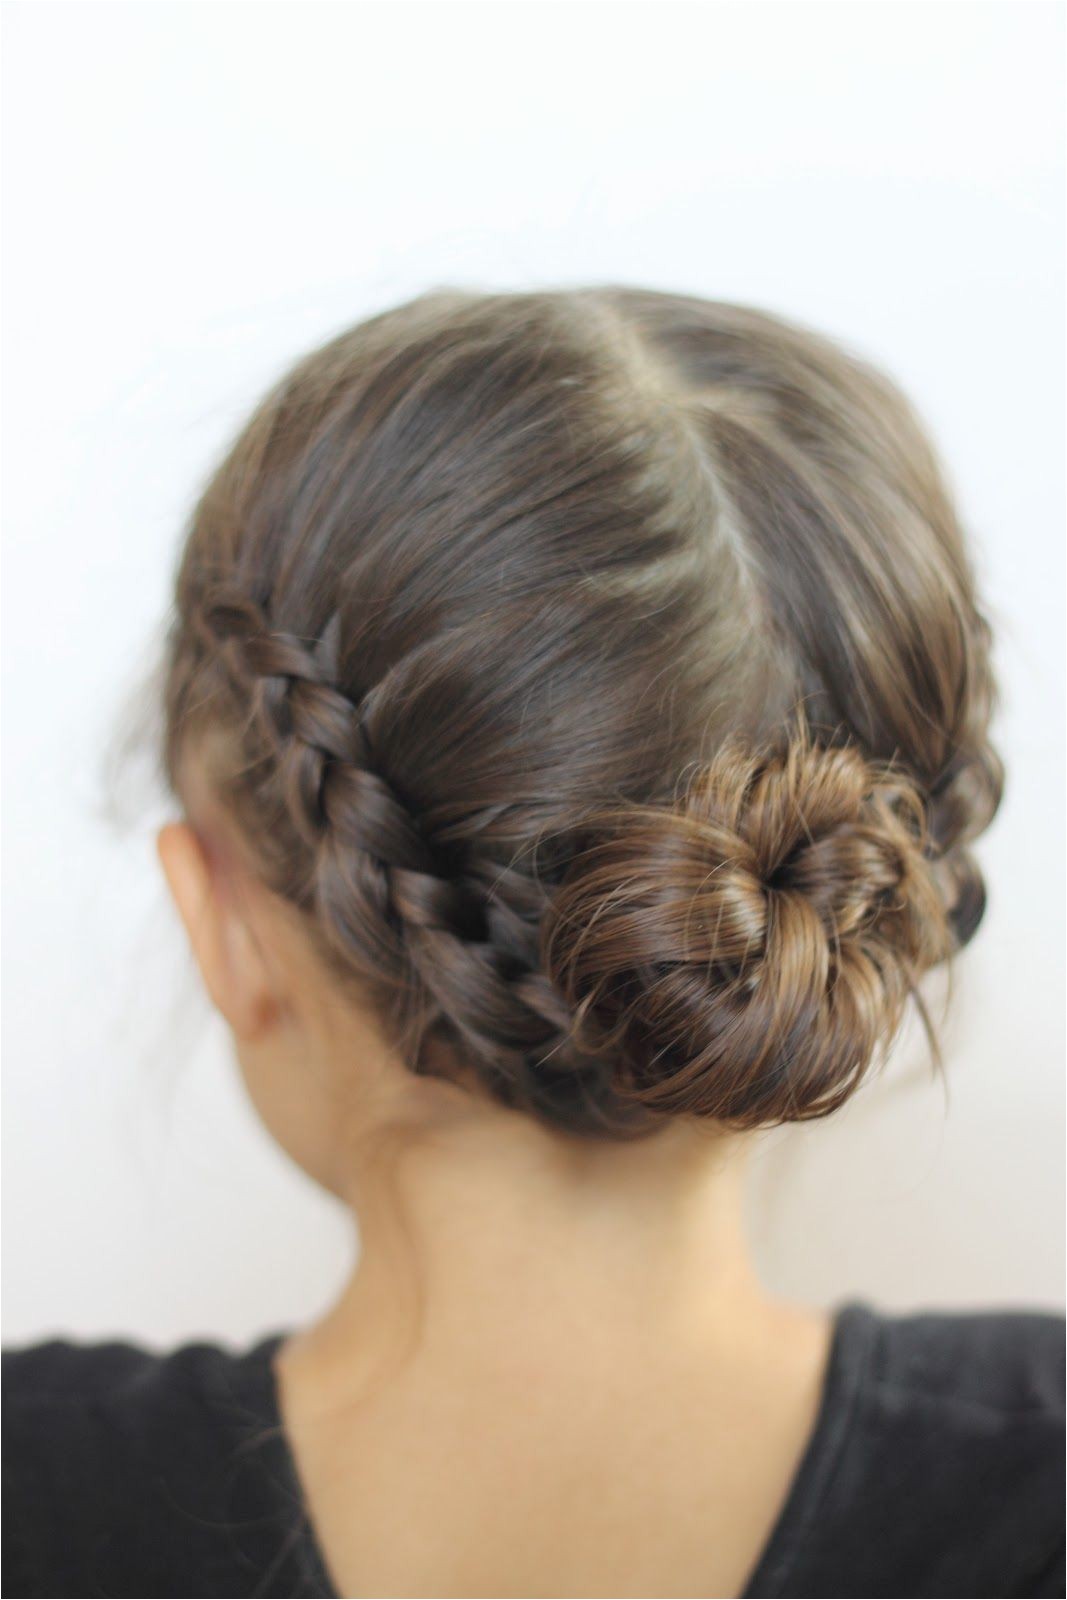 16 Toddler hair styles to mix up the pony tail and simple braids dutch braids french braid side pony tail braided pony messy bun side braid into a bun